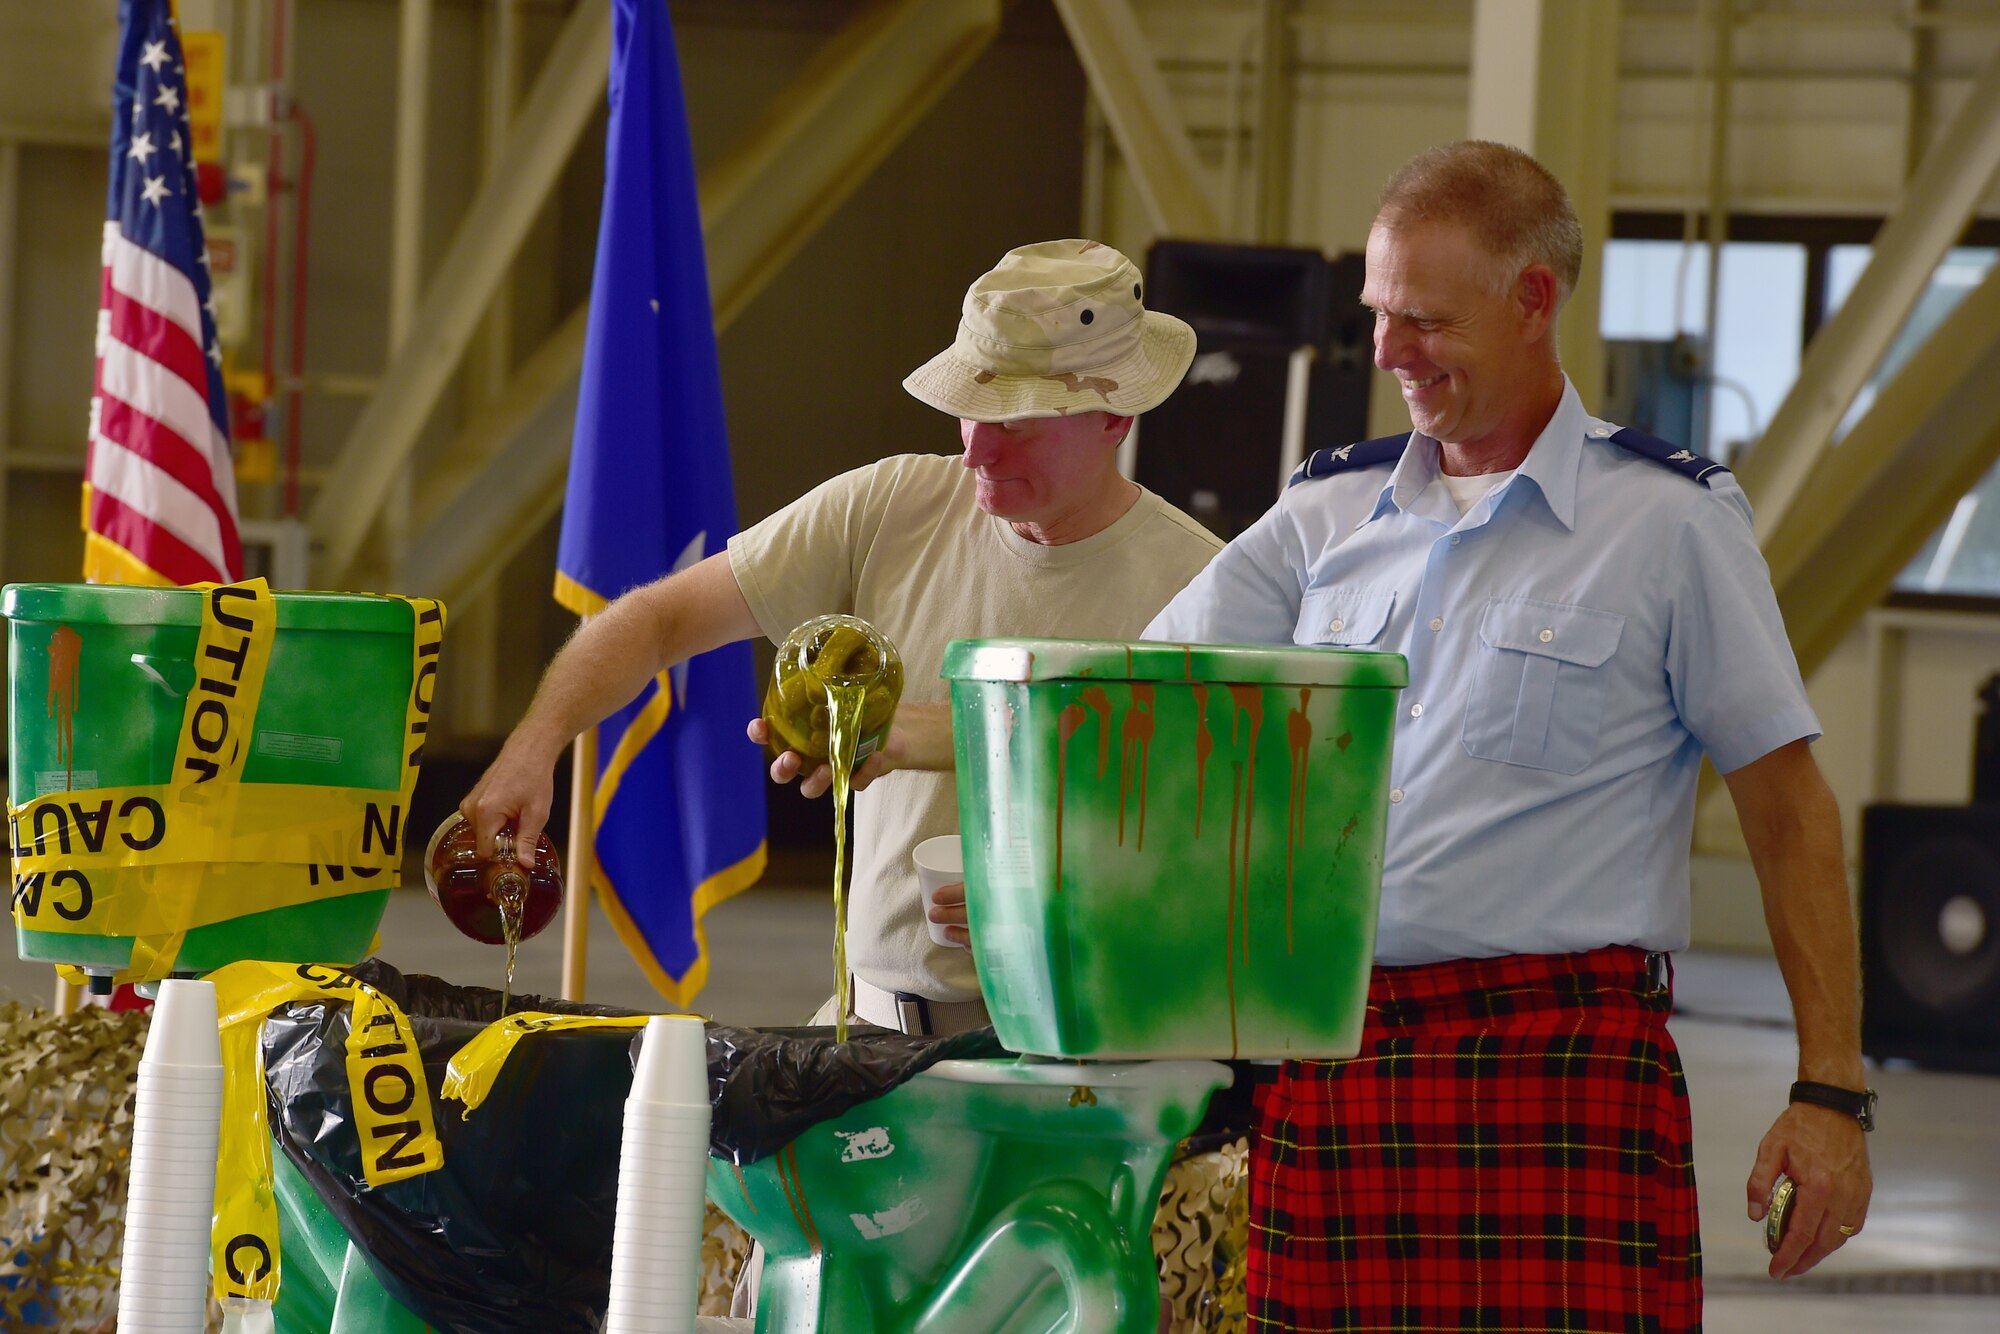 Maj. Gen. Ken Lewis, Air Force Reserve Command director of air space and information operations, and Col. Larry Shaw, 434th Air Refueling Wing commander, charge the Grog to commence a combat dining in at Grissom Air Reserve Base, Ind., Aug. 18, 2018. Grissom held its first combat dining in since 2007, where Airmen faced several fun challenges and were encouraged to show off their homemade uniforms. (U.S. Air Force Photo / Staff Sgt. Christopher Massey)